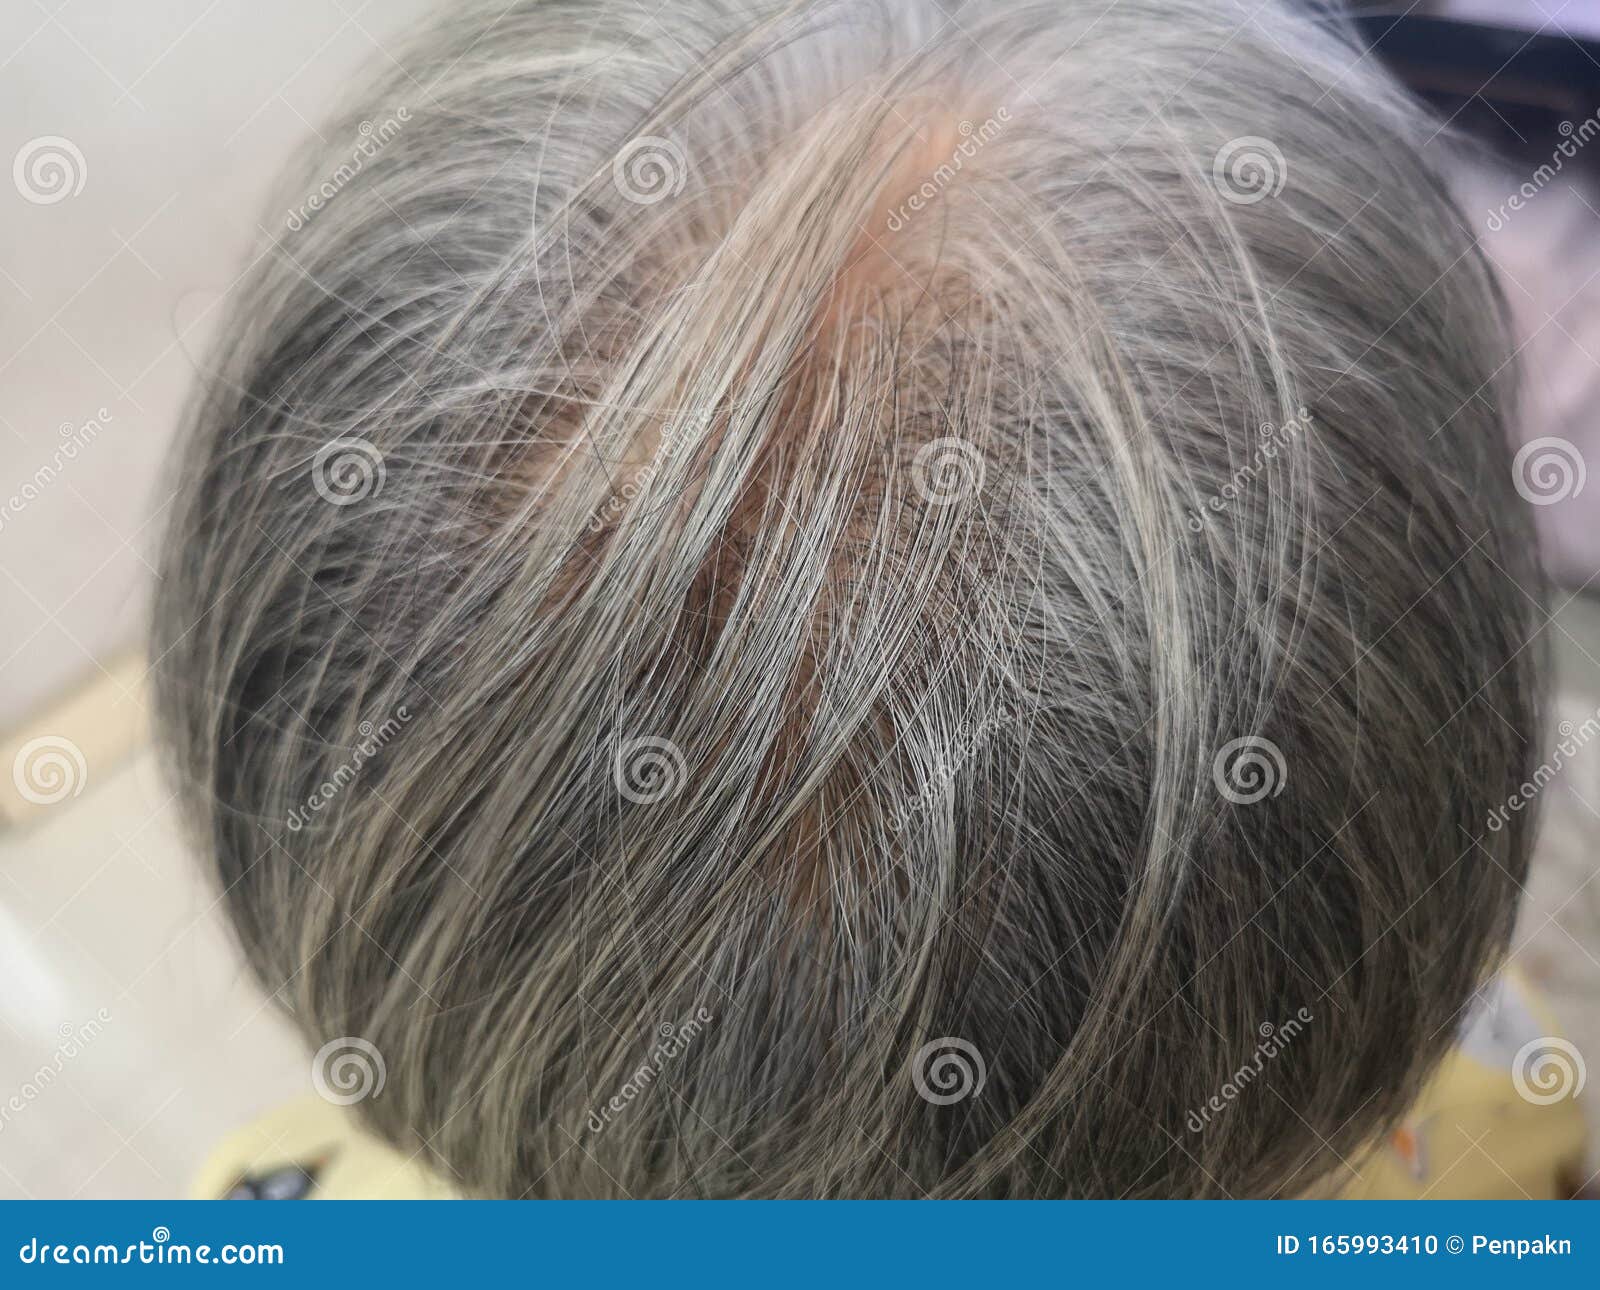 White Hair Turn To Black Hair Naturally Permanently in just 3 minutes   Gray hair dye with tomato  Grey hair dye Dyed hair Black hair dye